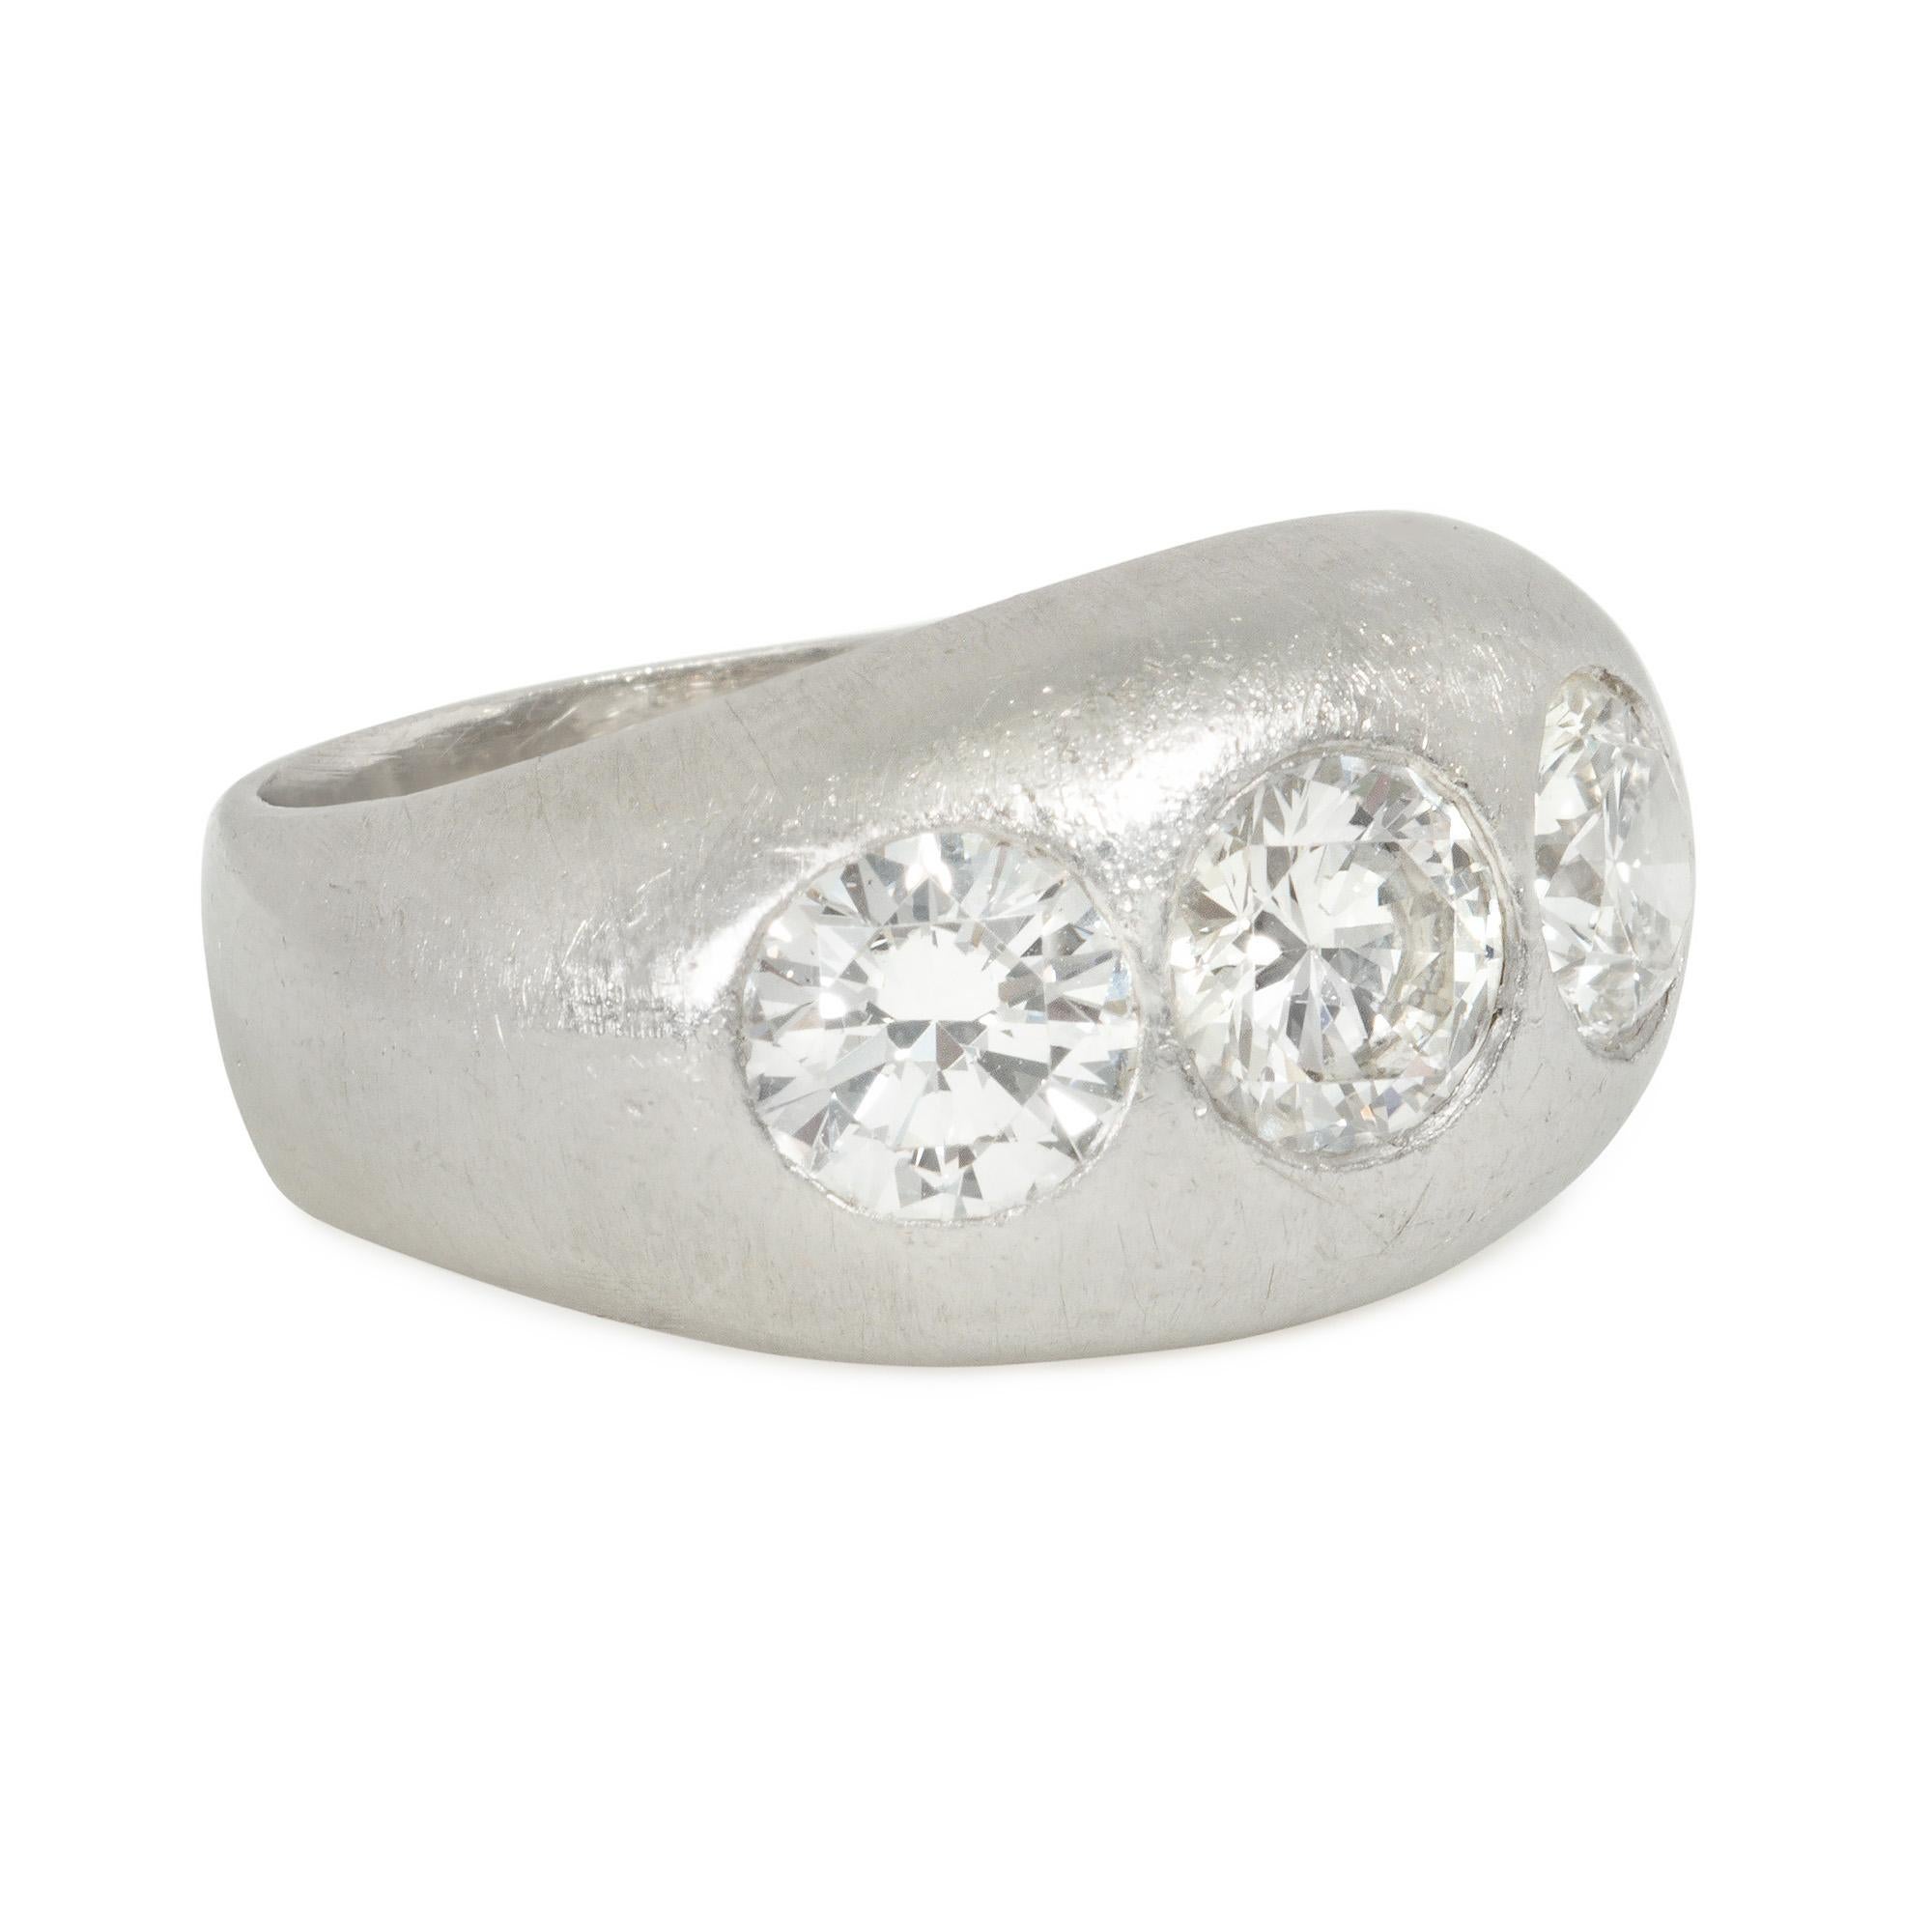 An Art Deco platinum and diamond band-style ring featuring three flush-set old European cut diamonds of approximately 0.70 ct., 0.75 ct. and 0.70 ct., respectively
Face-up vertical measurement approximately 11mm

* Includes Kentshire's letter of